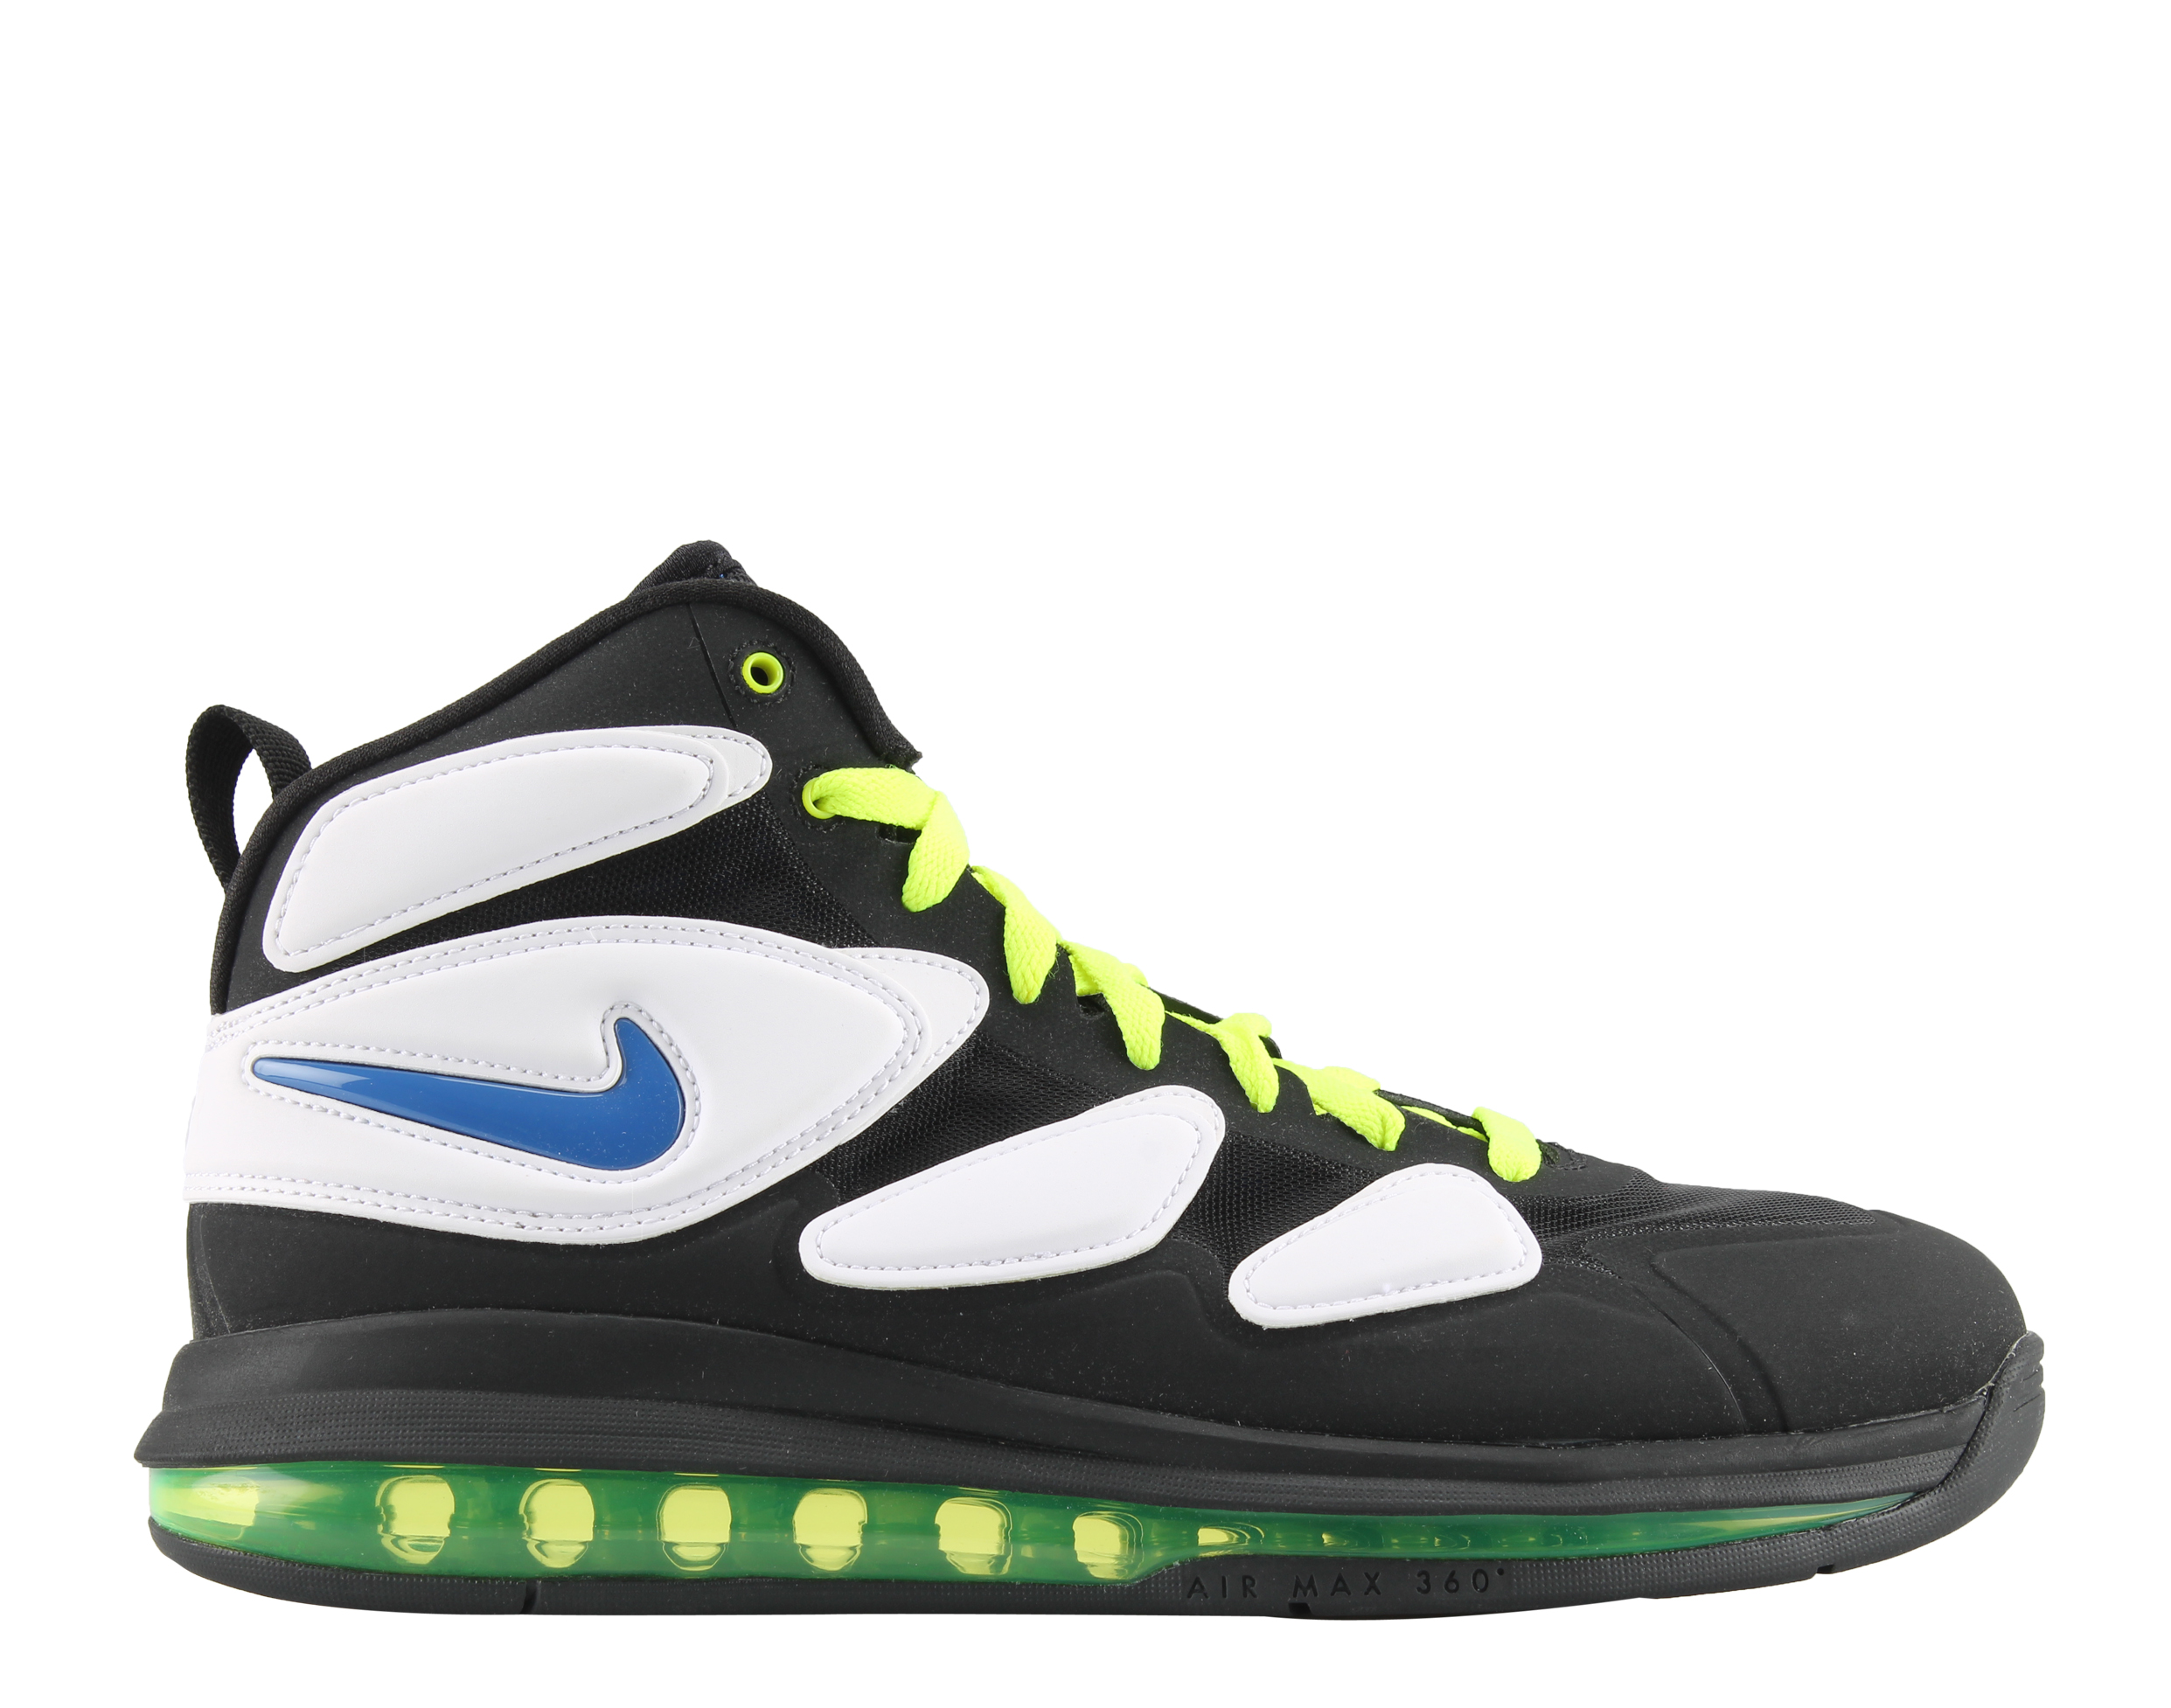 Nike Air Max Sq Uptempo Zm Basketball Men's Shoes - image 2 of 6